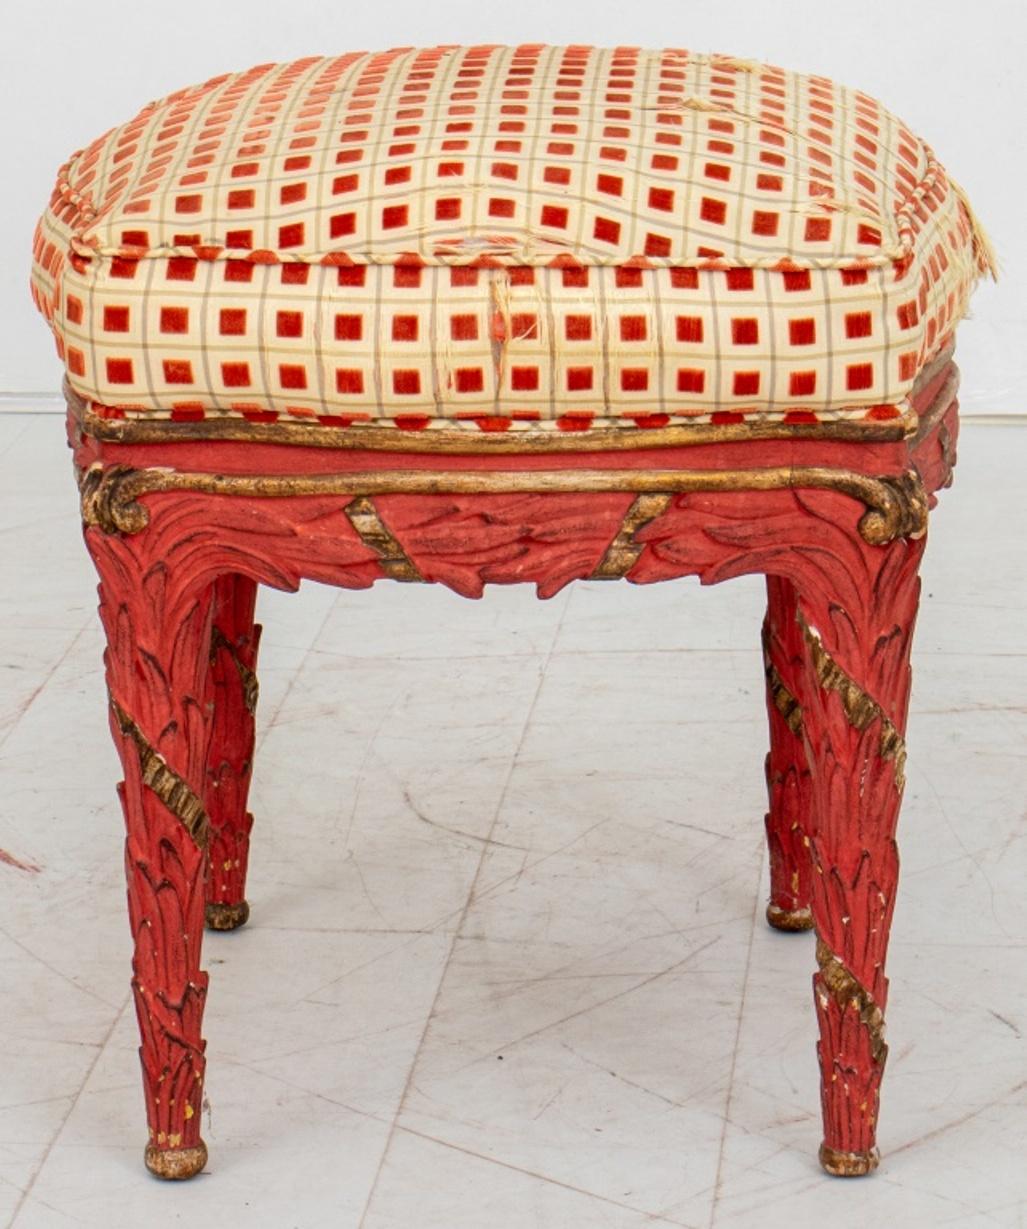 20th Century Serge Roche Manner Coral Painted and Gilt Stool